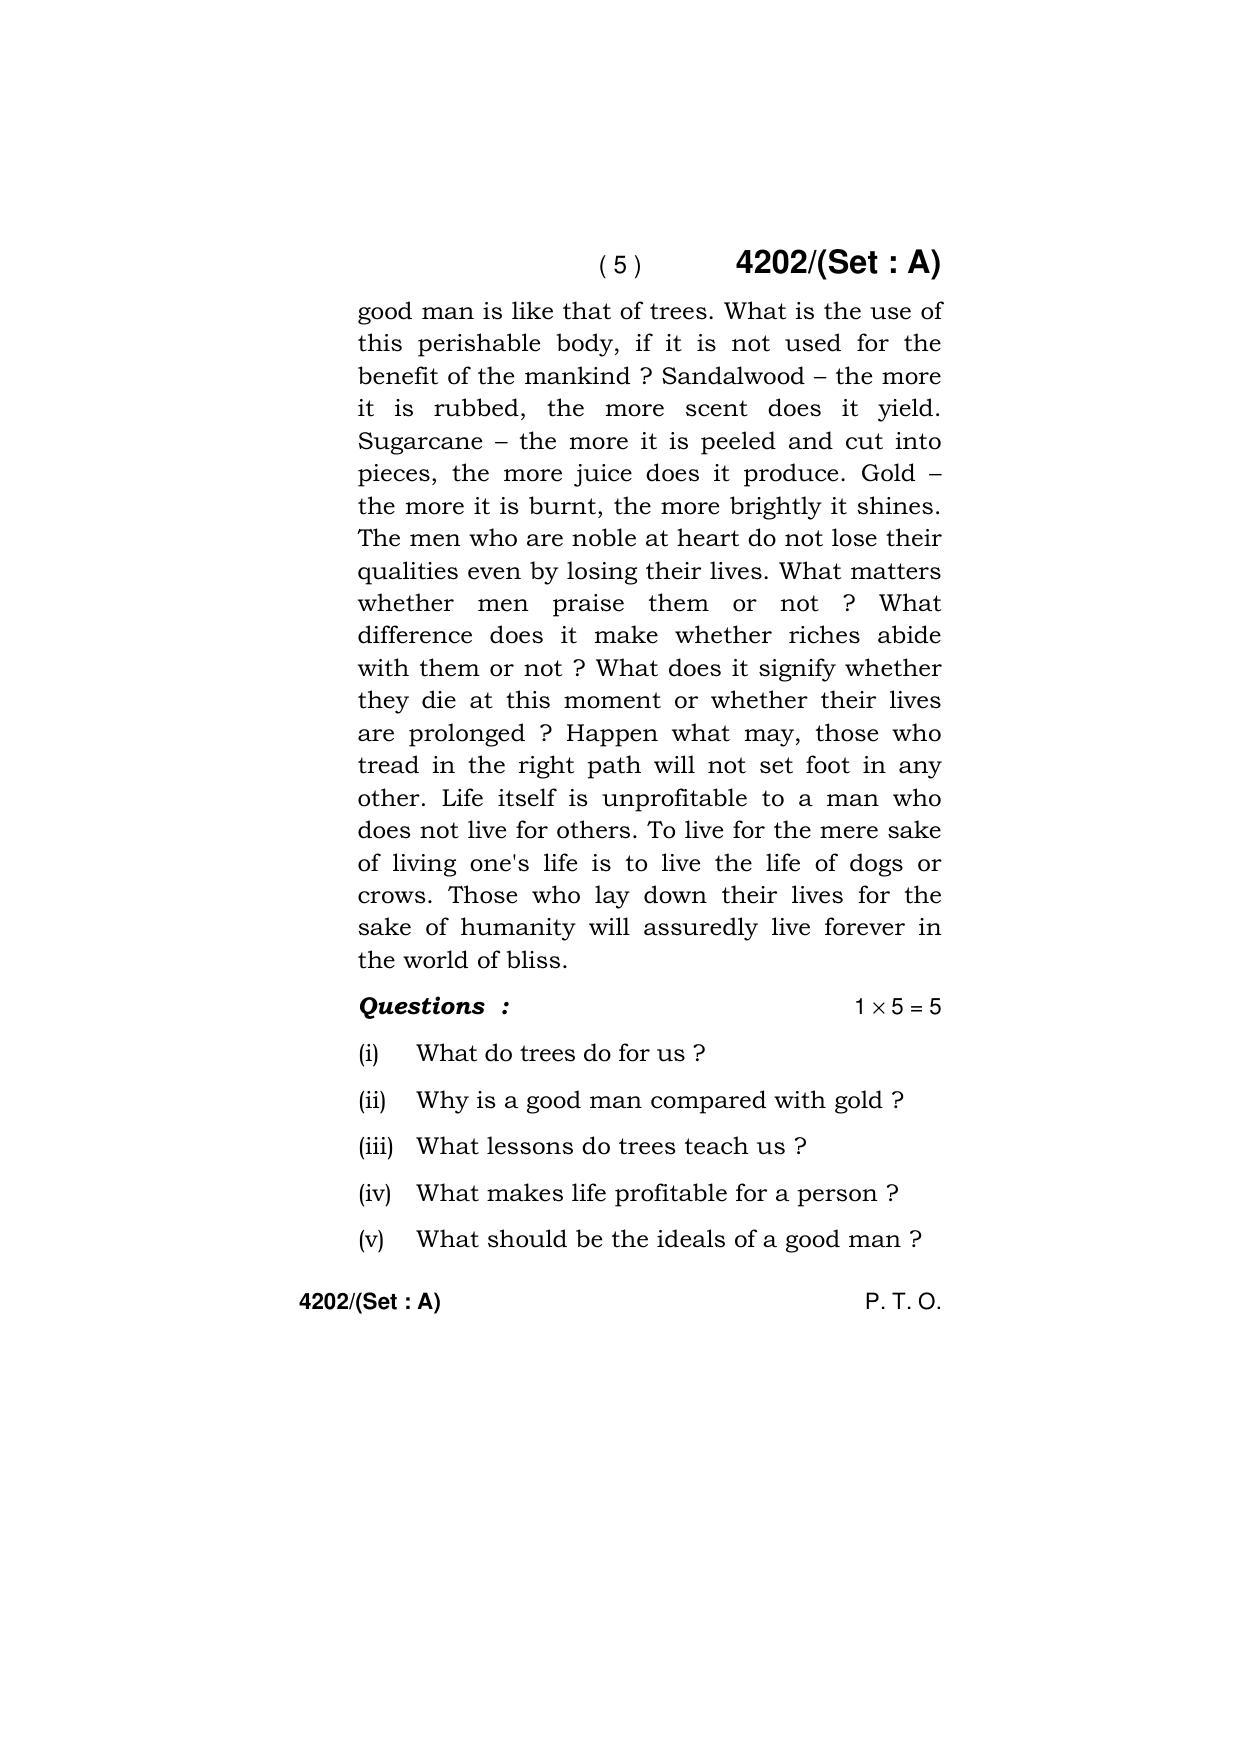 Haryana Board HBSE Class 10 English (All Set) 2019 Question Paper - Page 5